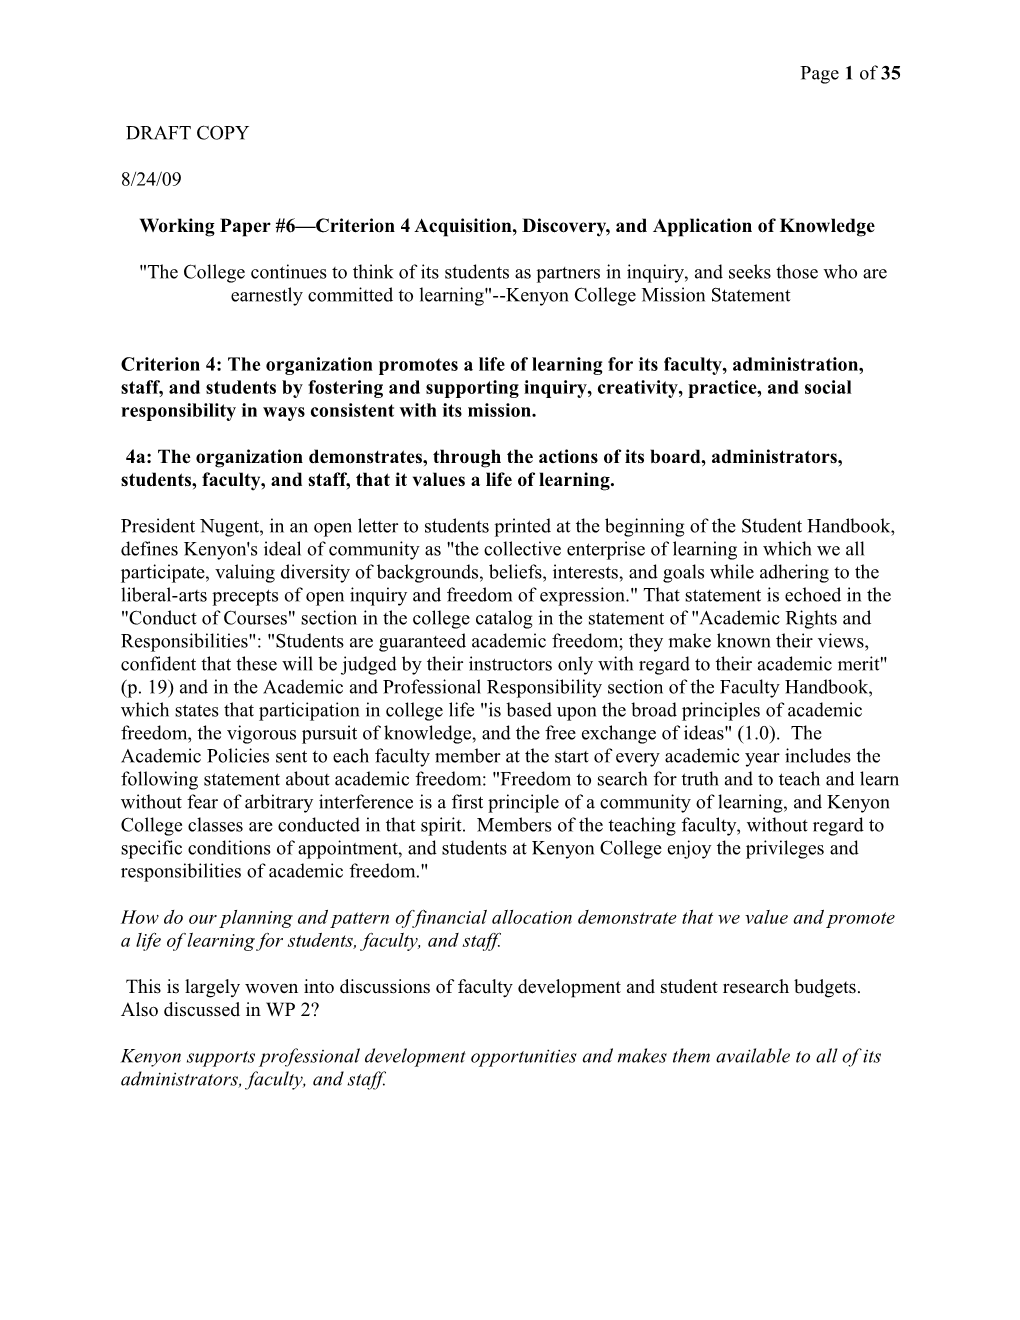 Working Paper #6 Criterion 4 Acquisition, Discovery, Andapplication of Knowledge